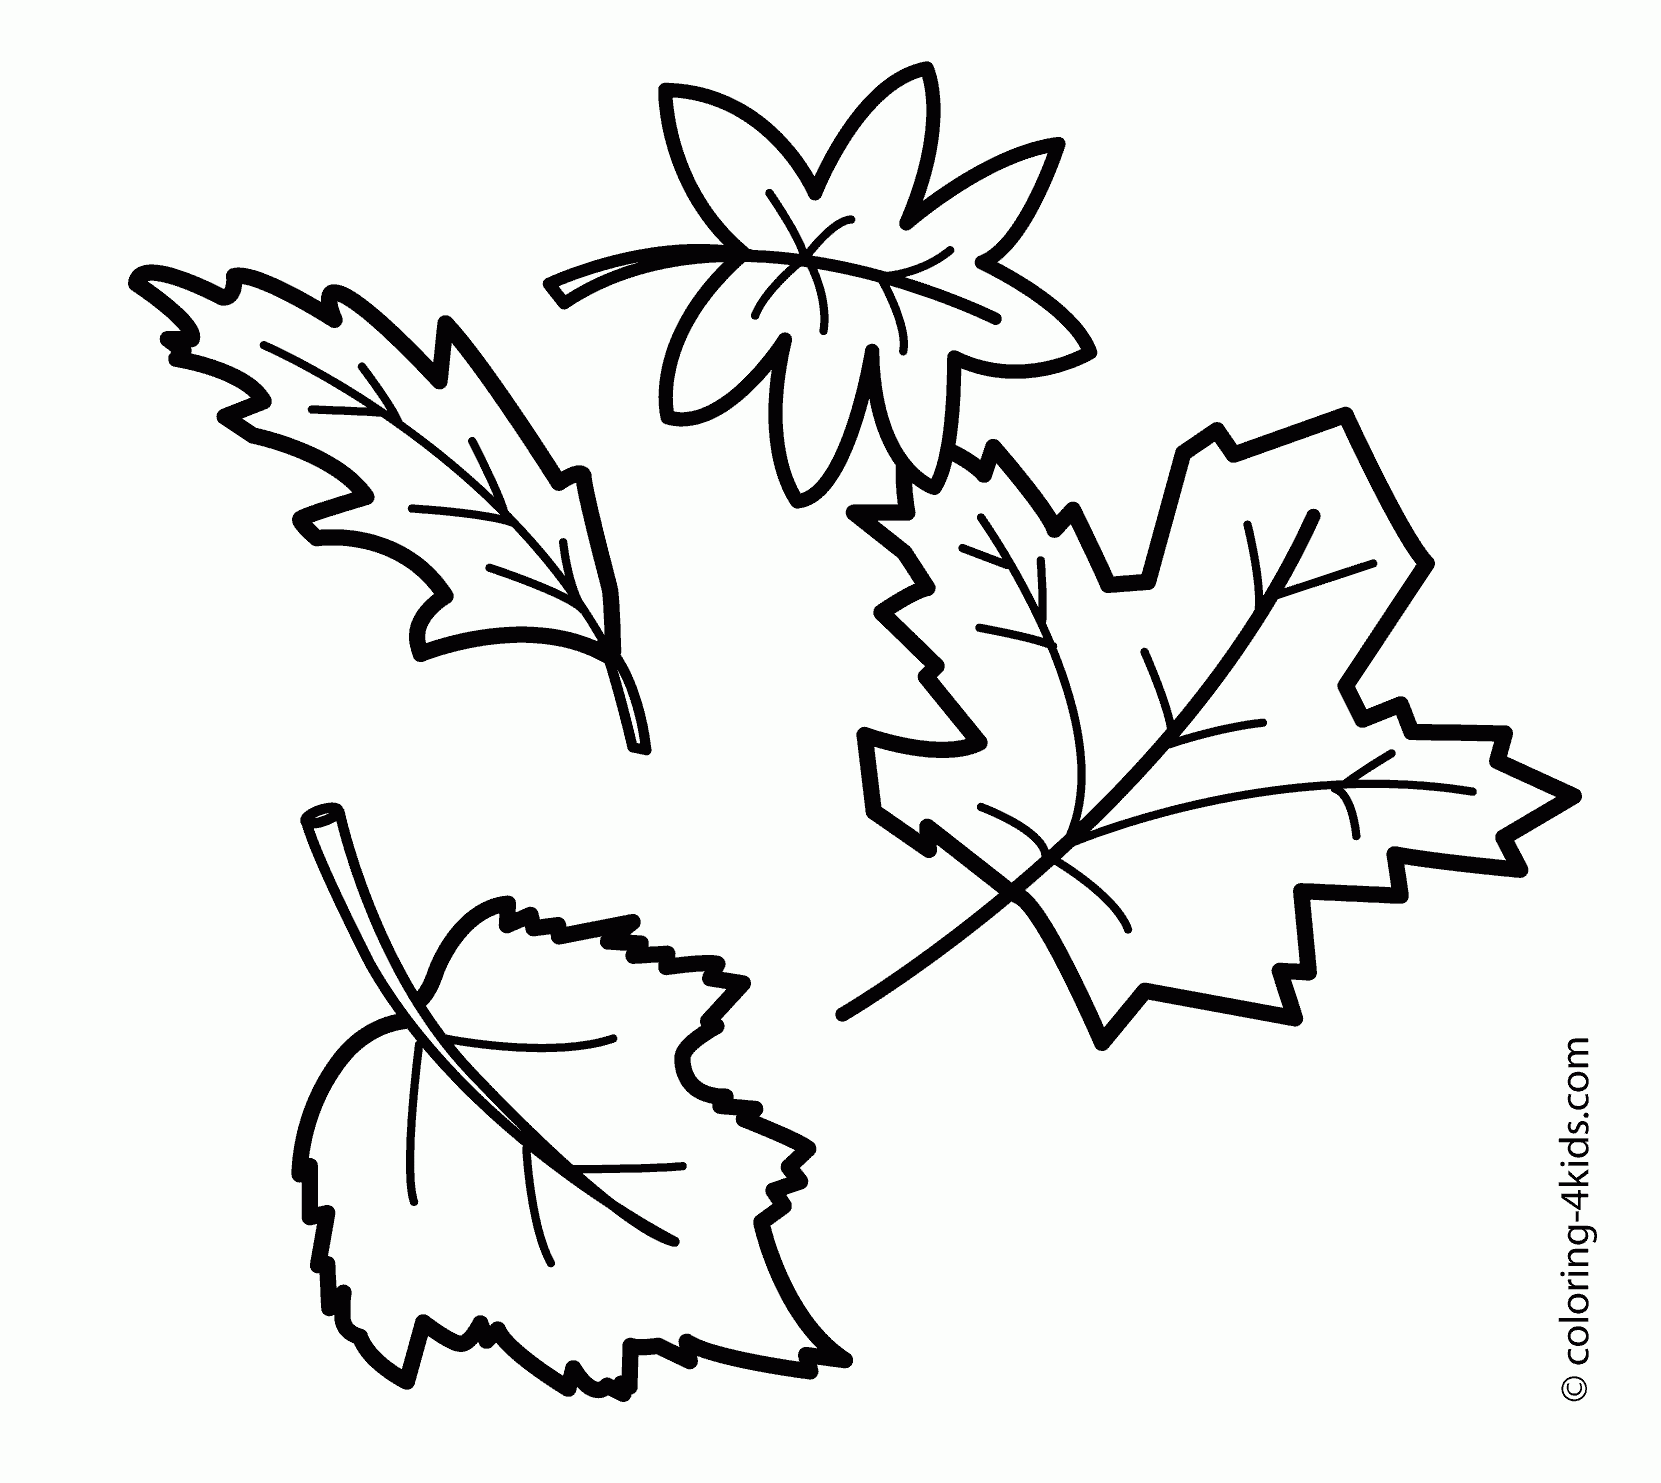 Related Leaf Coloring Pages, Leaf Coloring Pages Palm